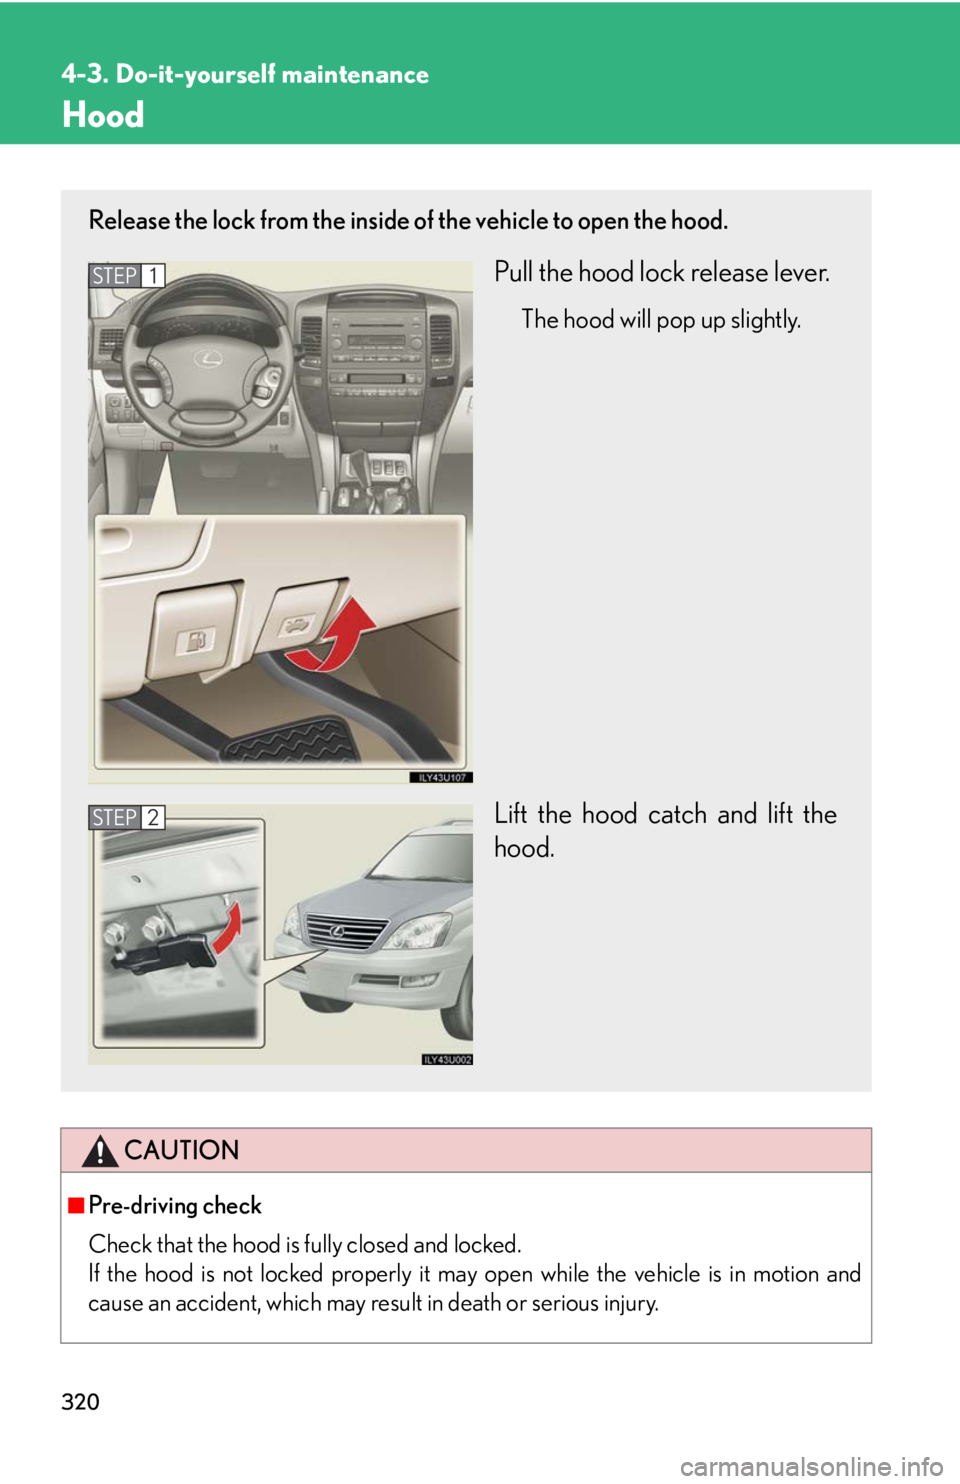 Lexus GX470 2008  Do-it-yourself maintenance / LEXUS 2008 GX470 OWNERS MANUAL (OM60D82U) 320
4-3. Do-it-yourself maintenance
Hood
CAUTION
■Pre-driving check
Check that the hood is fully closed and locked. 
If the hood is not locked properly it may open while the vehicle is in motion and